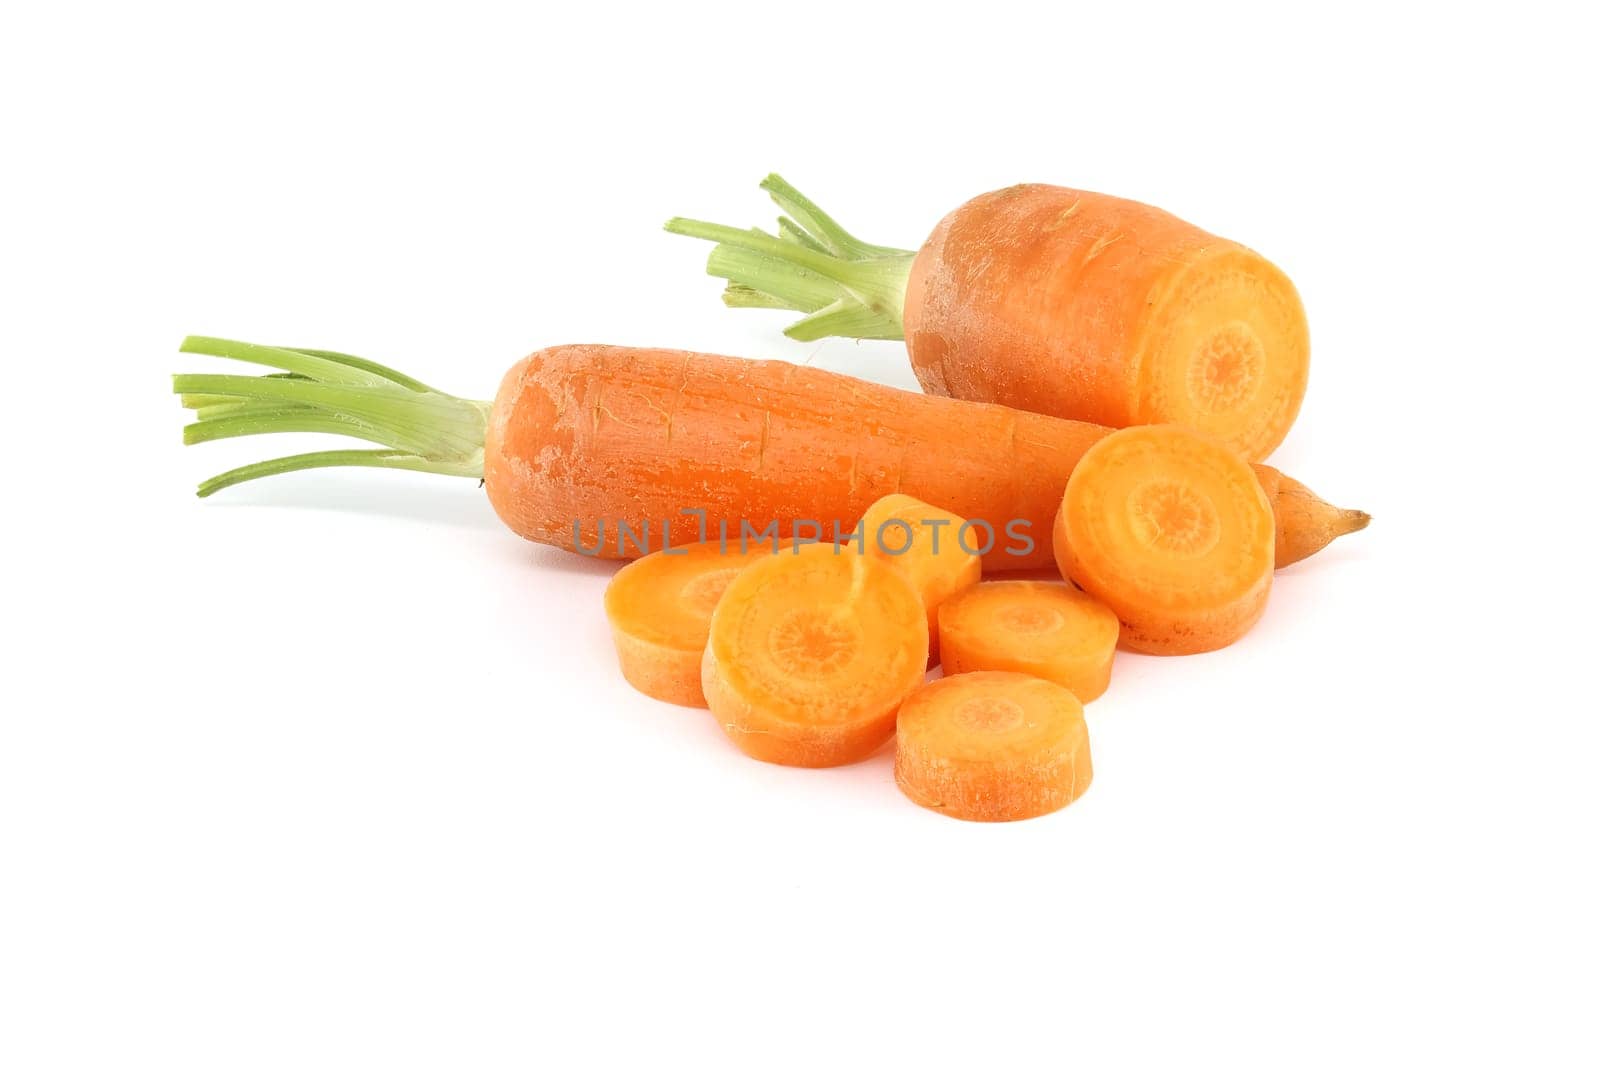 Whole carrot and its sliced pieces isolated against a white background by NetPix